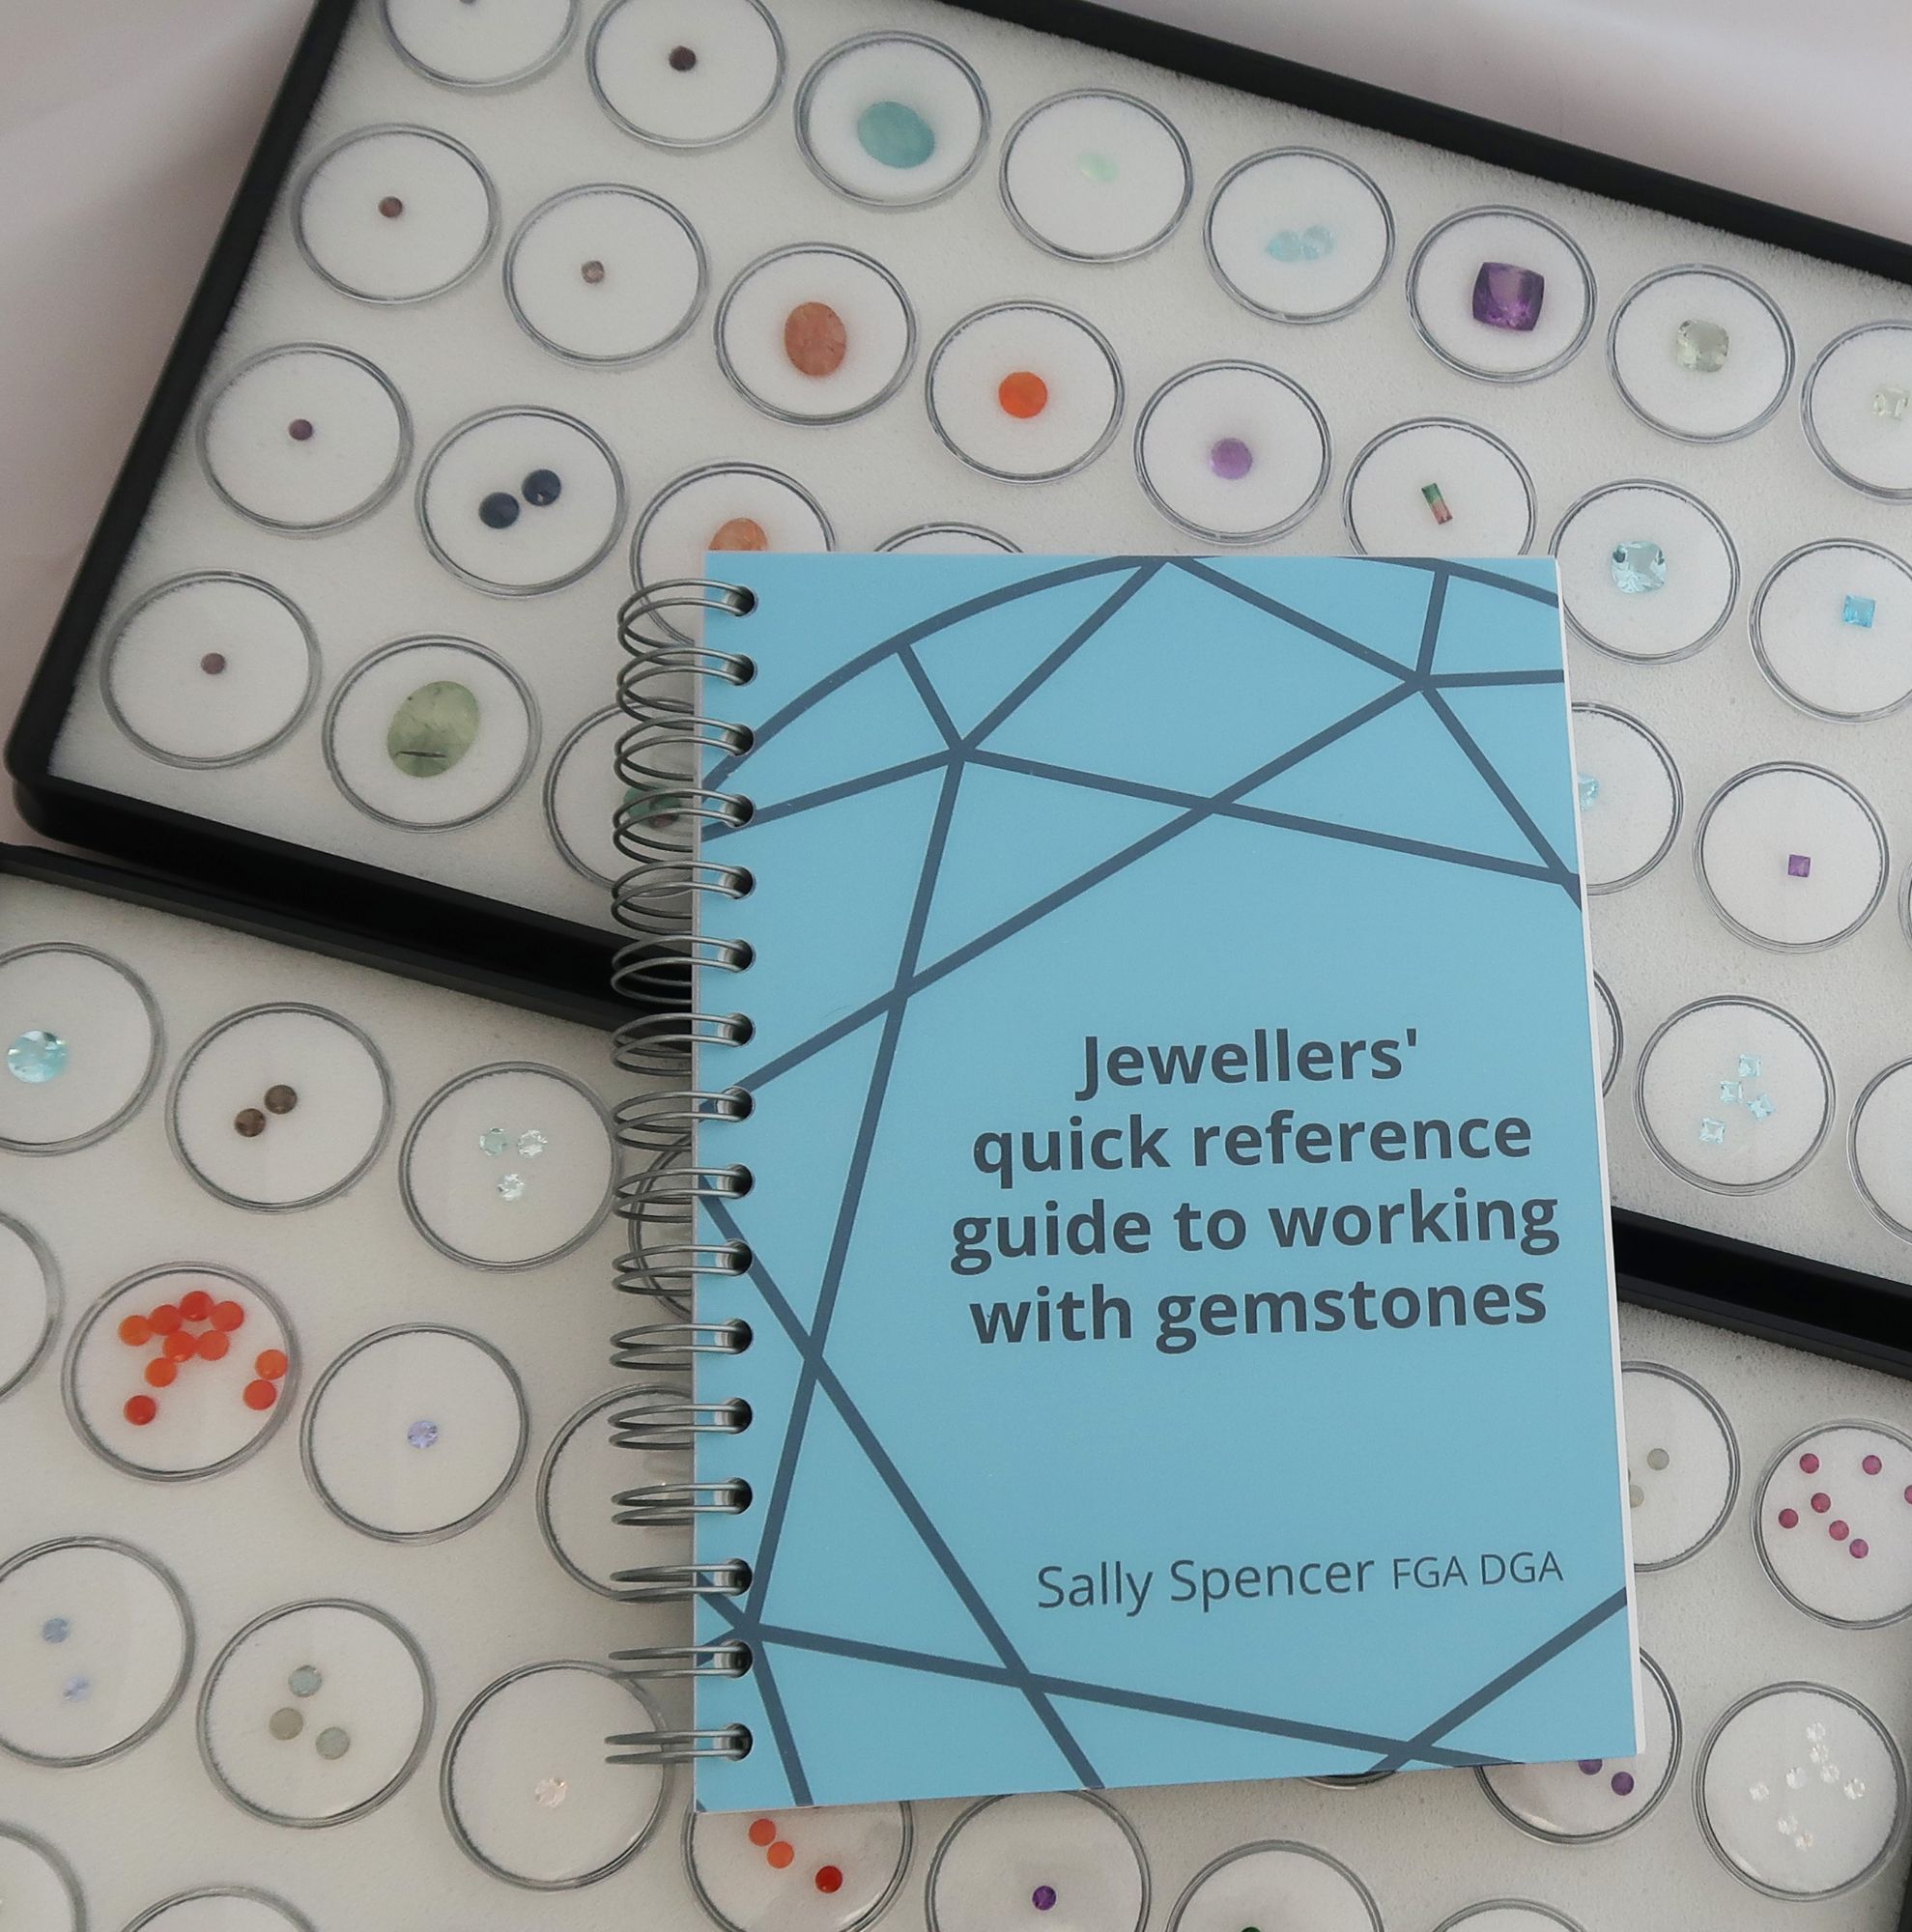 gemstones; gemstone jewellery; gemmology; jewellery making book; quick reference guide to working with gemstones by Sally Spencer